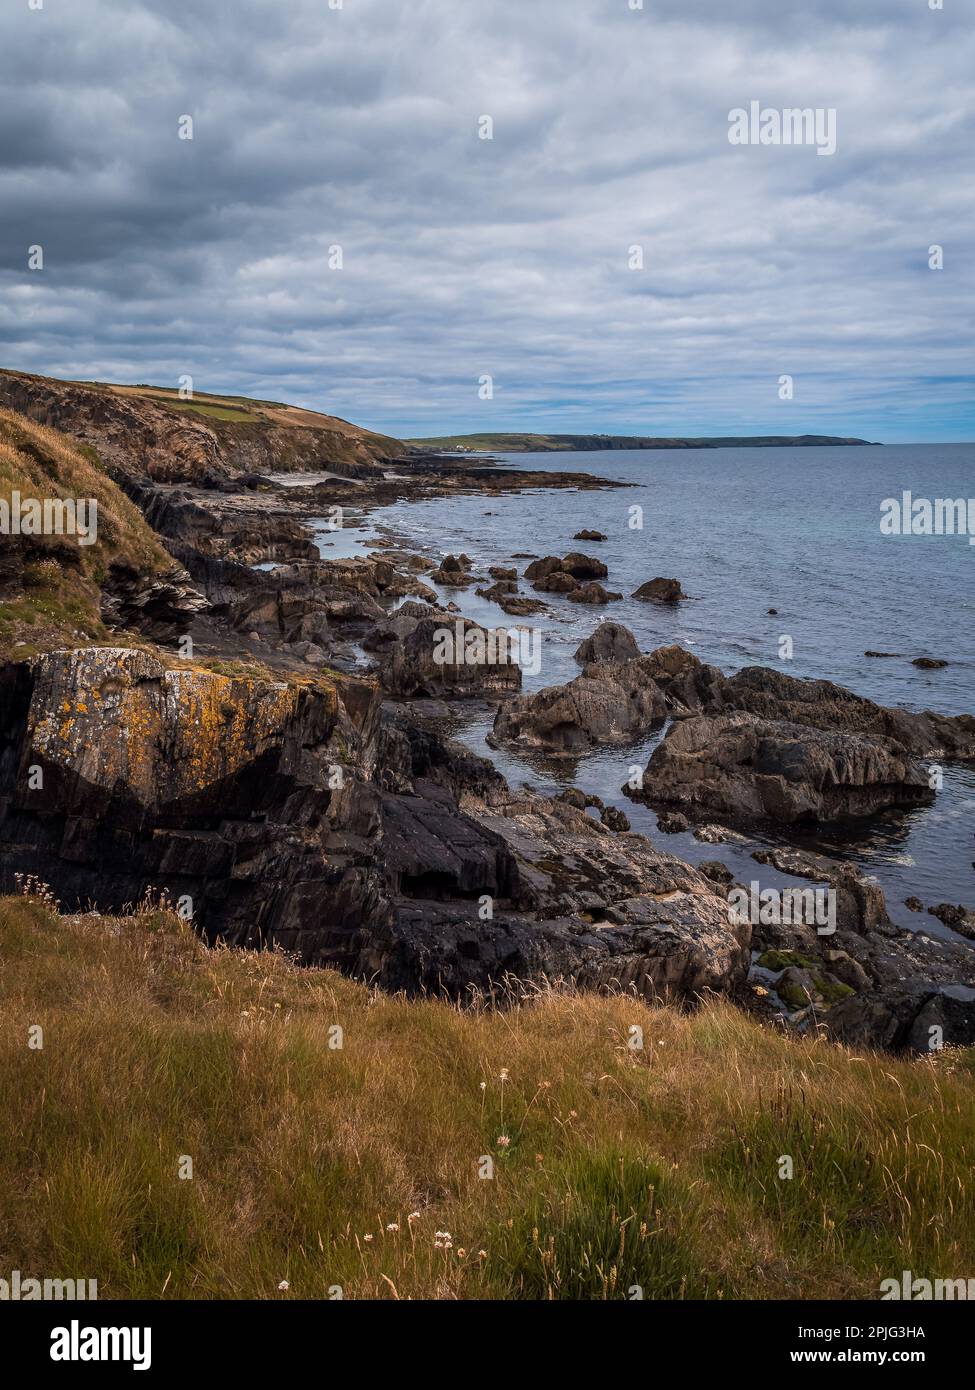 Picturesque landscape. Wild vegetation on stony soil. Cloudy sky over the ocean. Views on the wild Atlantic way, hills under clouds. Stock Photo